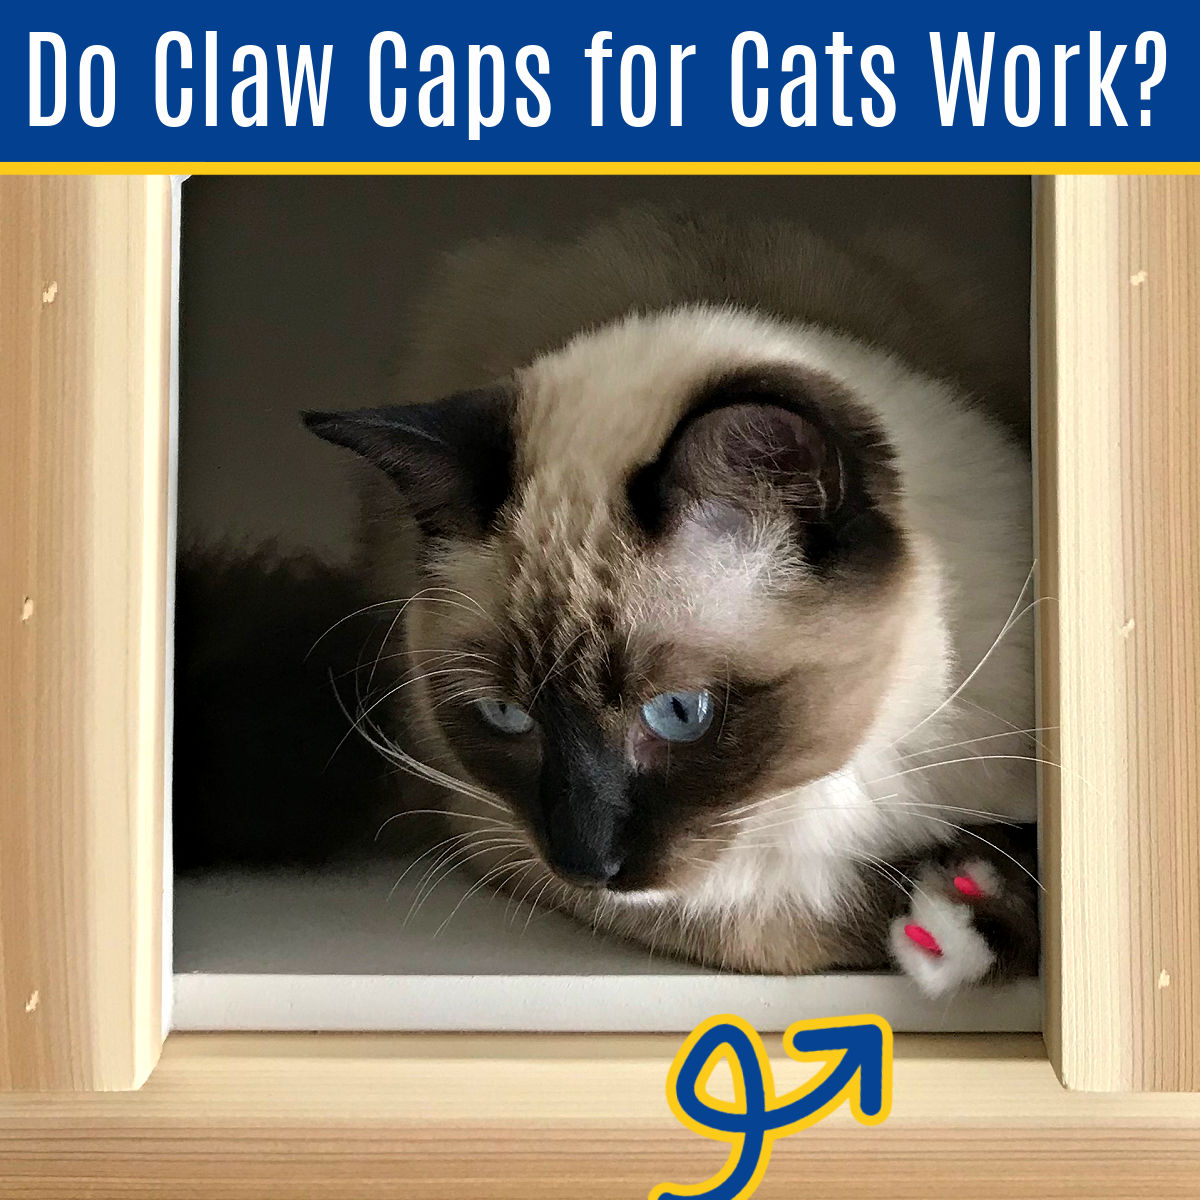 https://www.abbottsathome.com/wp-content/uploads/2021/07/Do-Claw-Caps-for-Cats-Work-2.jpg